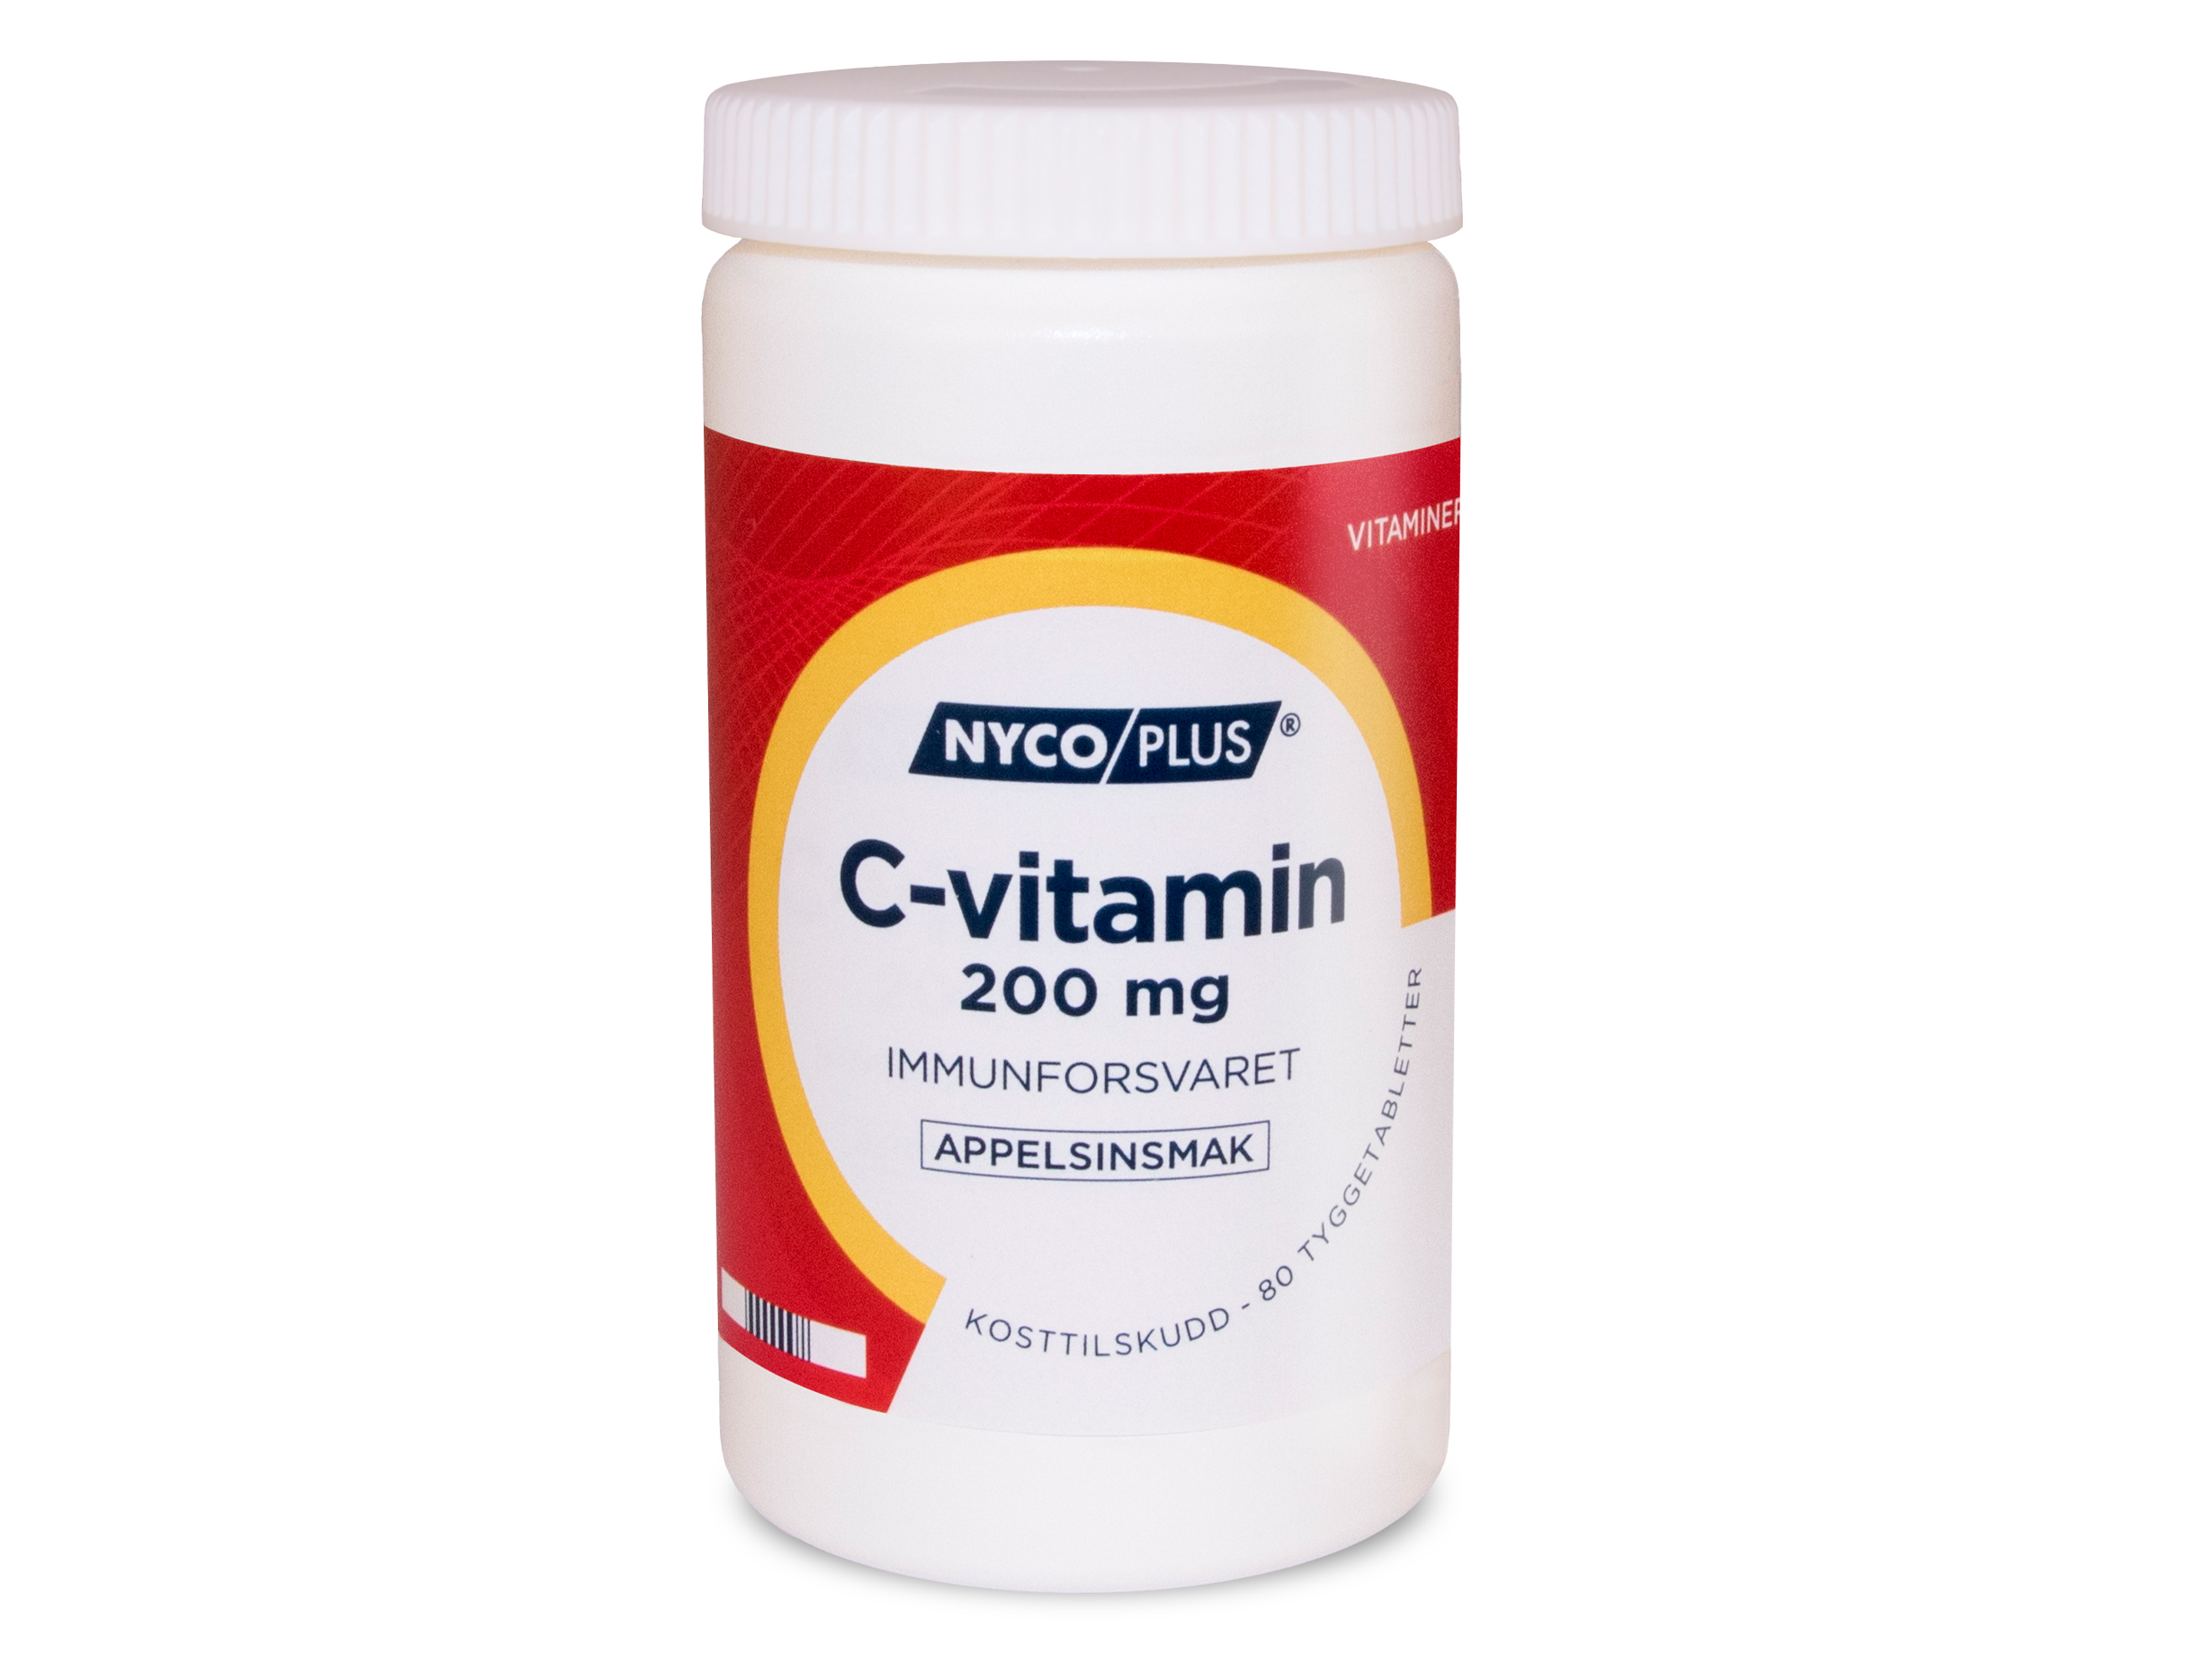 Nycoplus C-vitamin 200 mg, Appelsin, 80 tyggetabletter